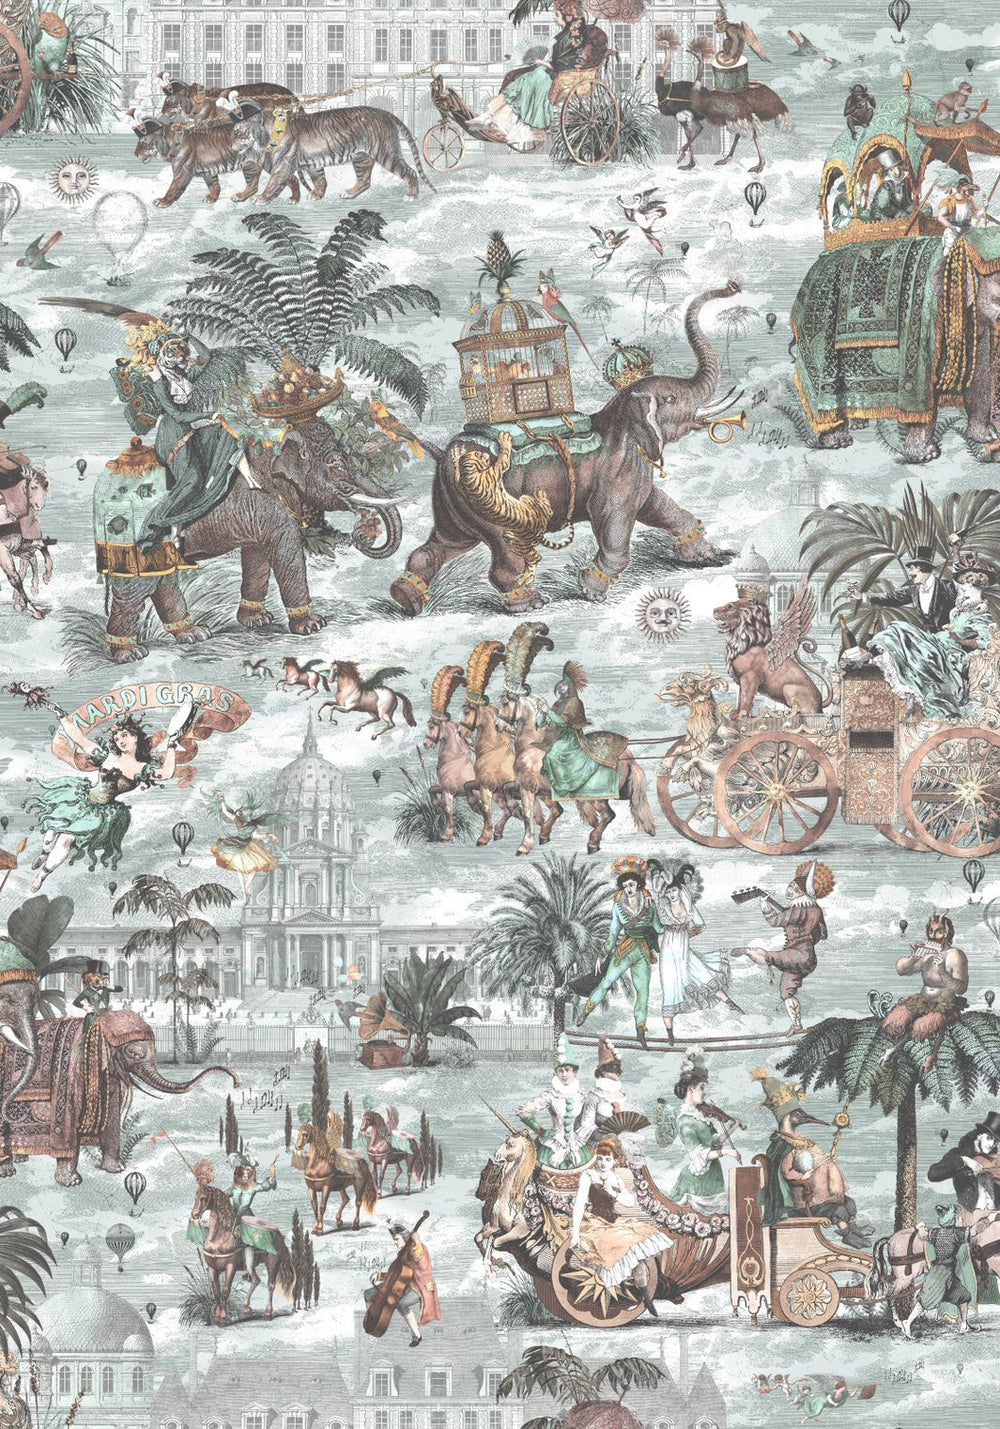 brand-mckenzie-carnival-fever-carnival-march-fiesta-whimsical-classical-wallpaper-wallcovering-seawater-peach